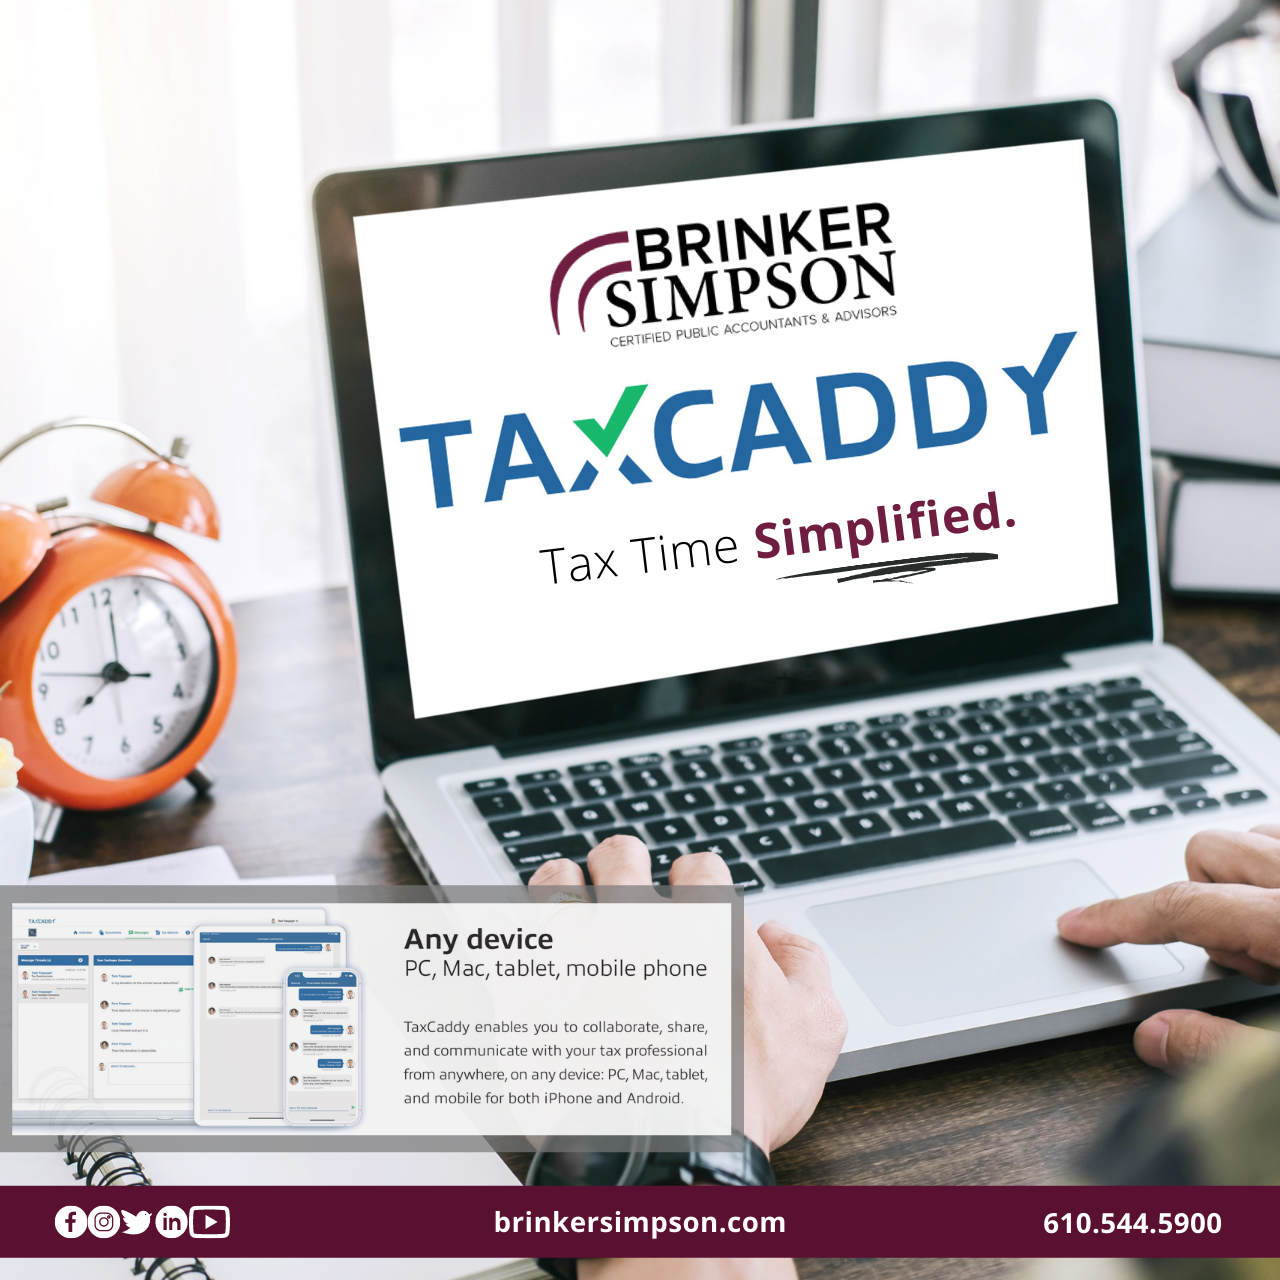 Brinker Simpson Simplifies Tax Time With TaxCaddy